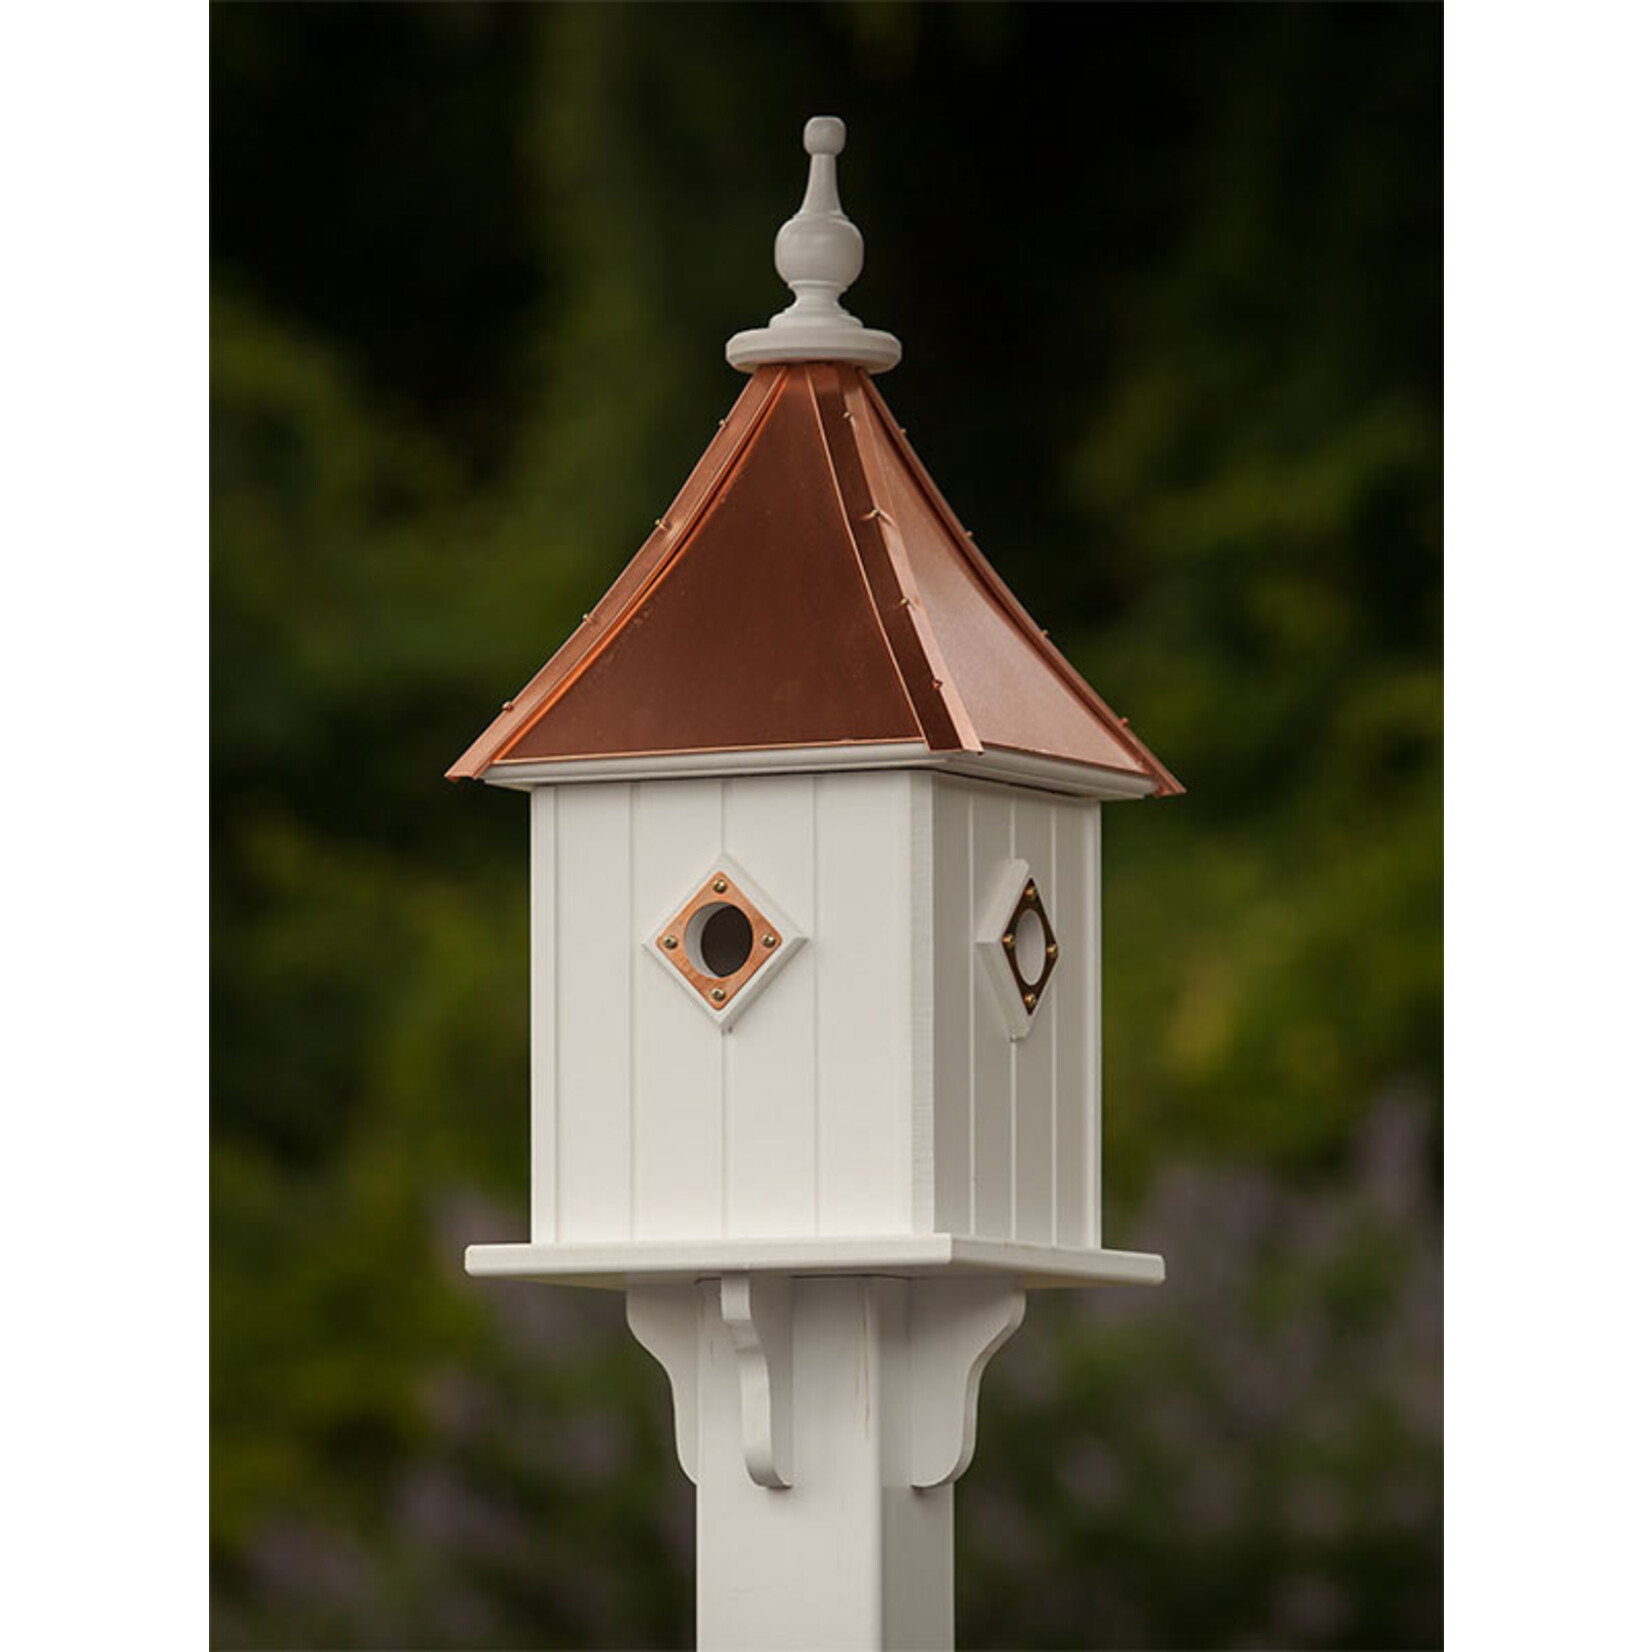 Fancy Home Products 10" Bluebird House – 4 Copper Perches